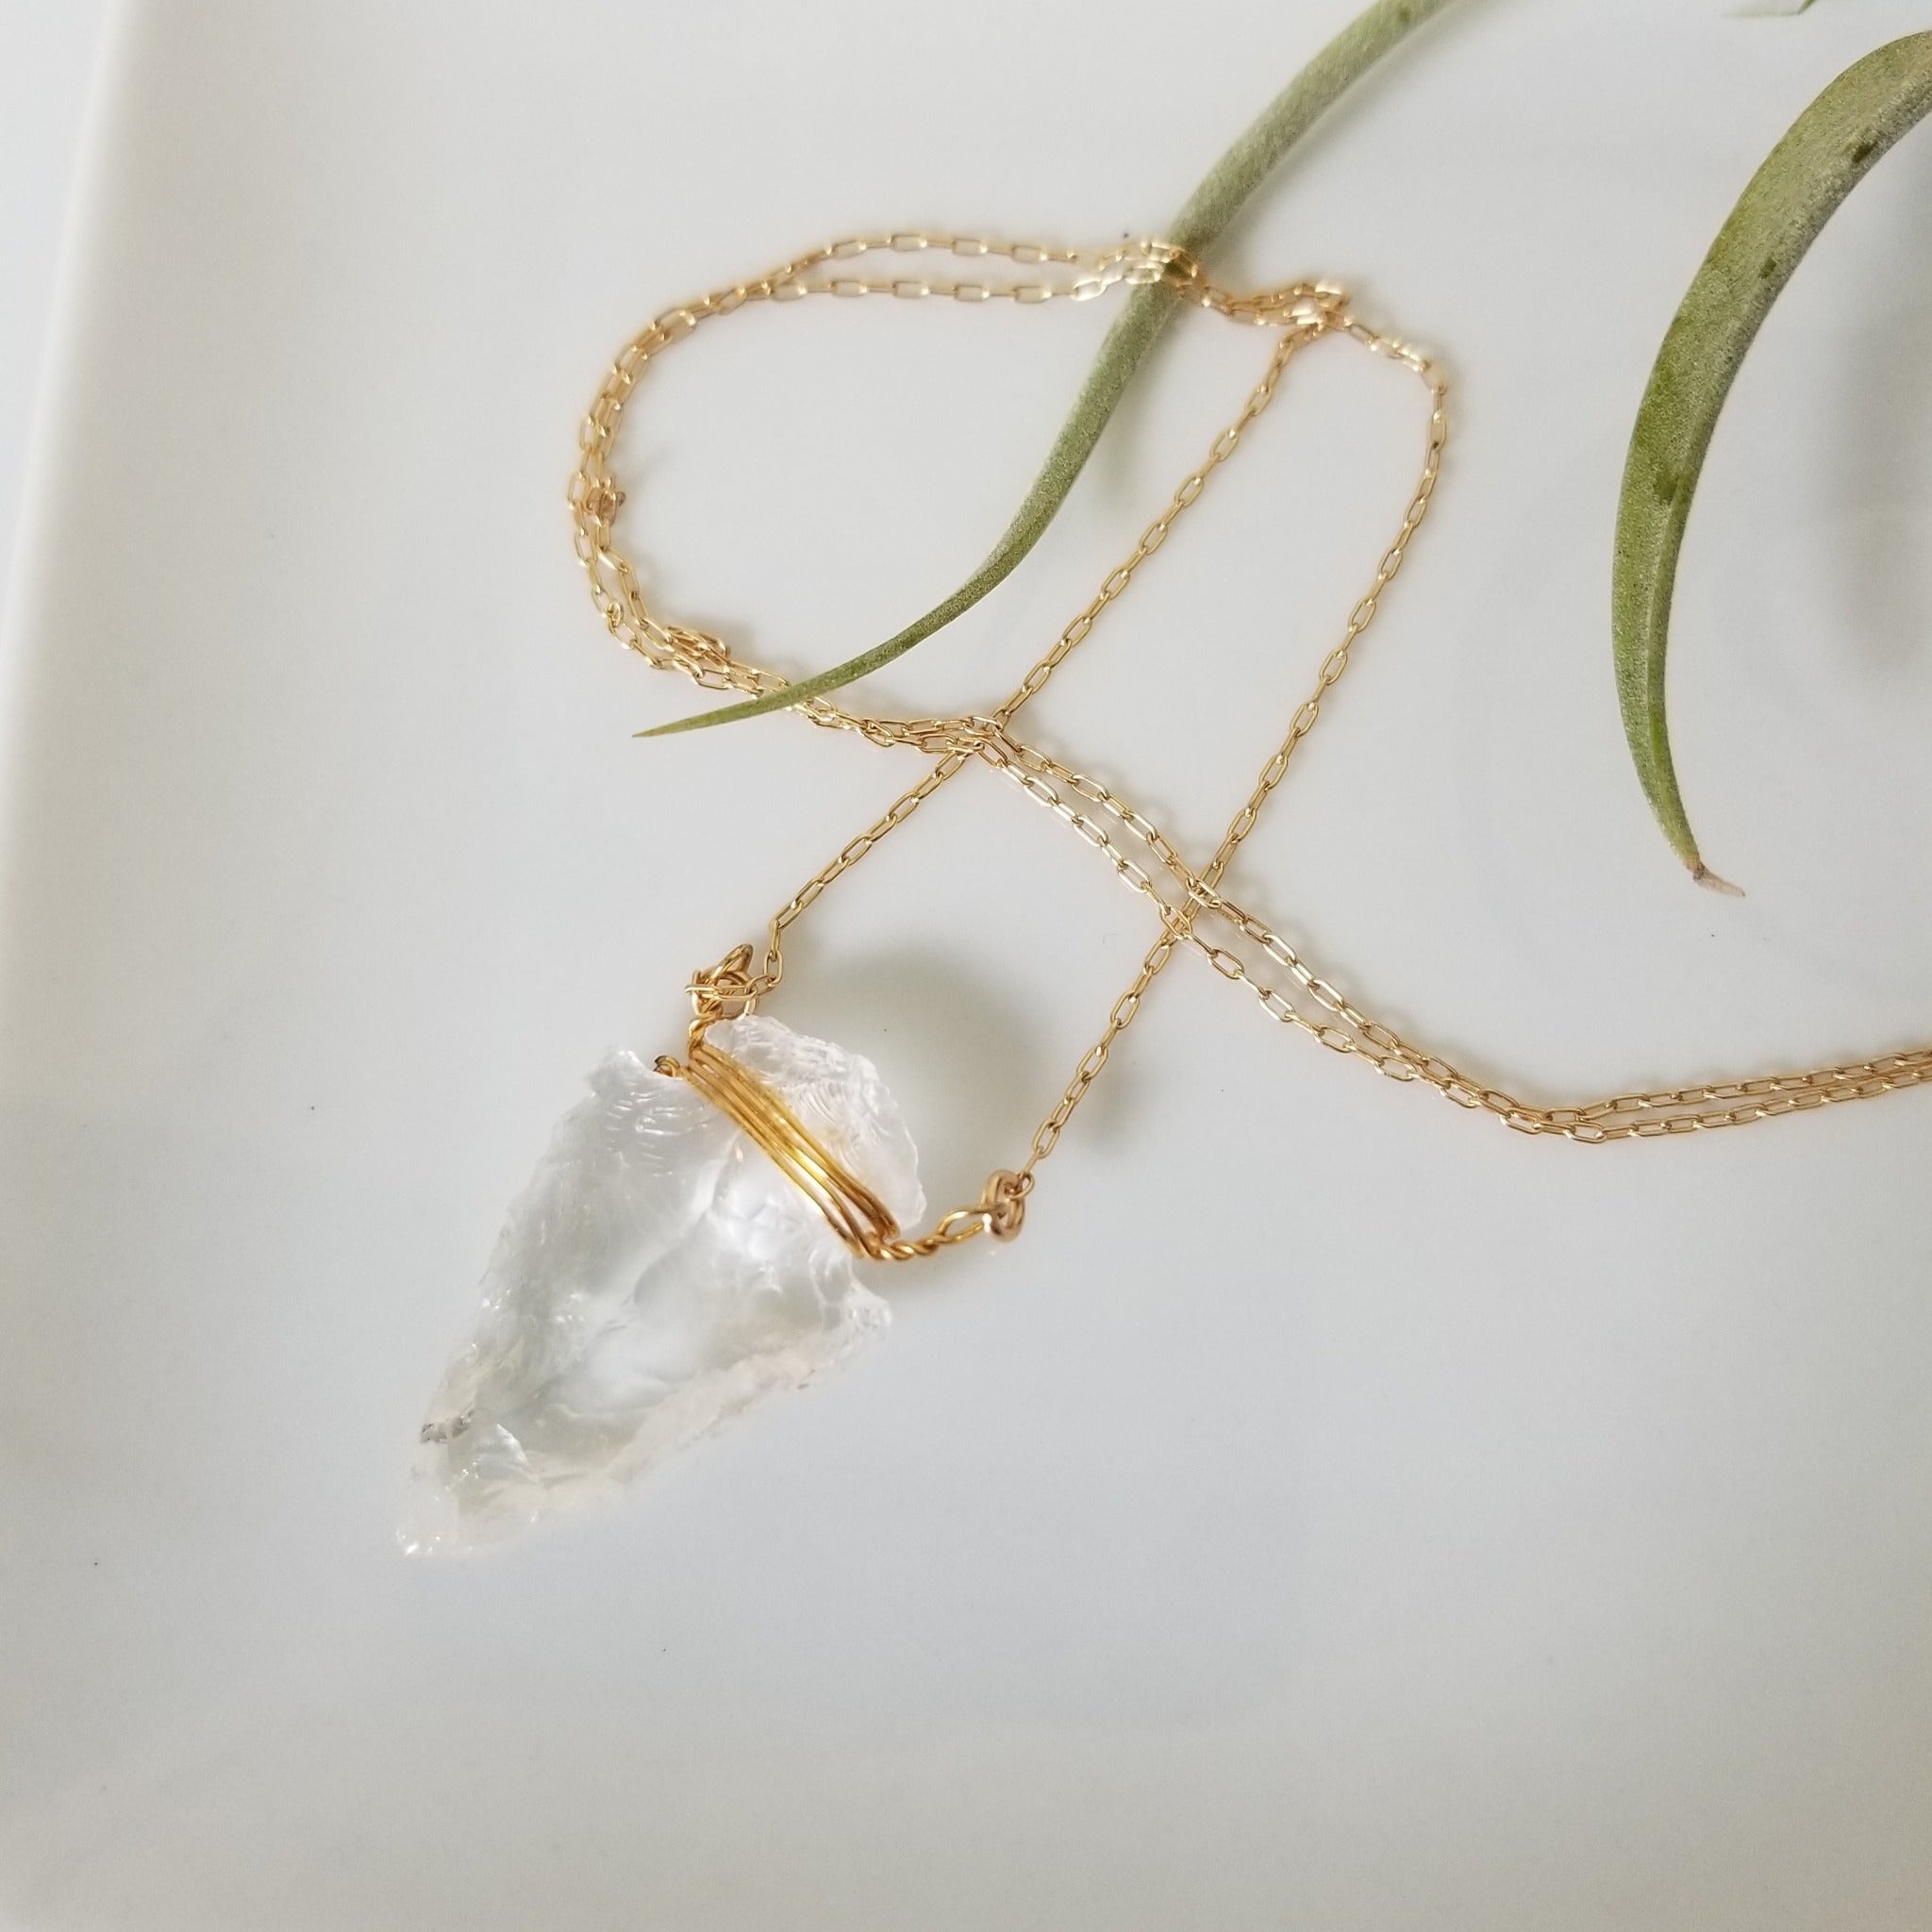 The "Steph" - Crystal Quartz Arrowhead Necklace - Sterling or Gold